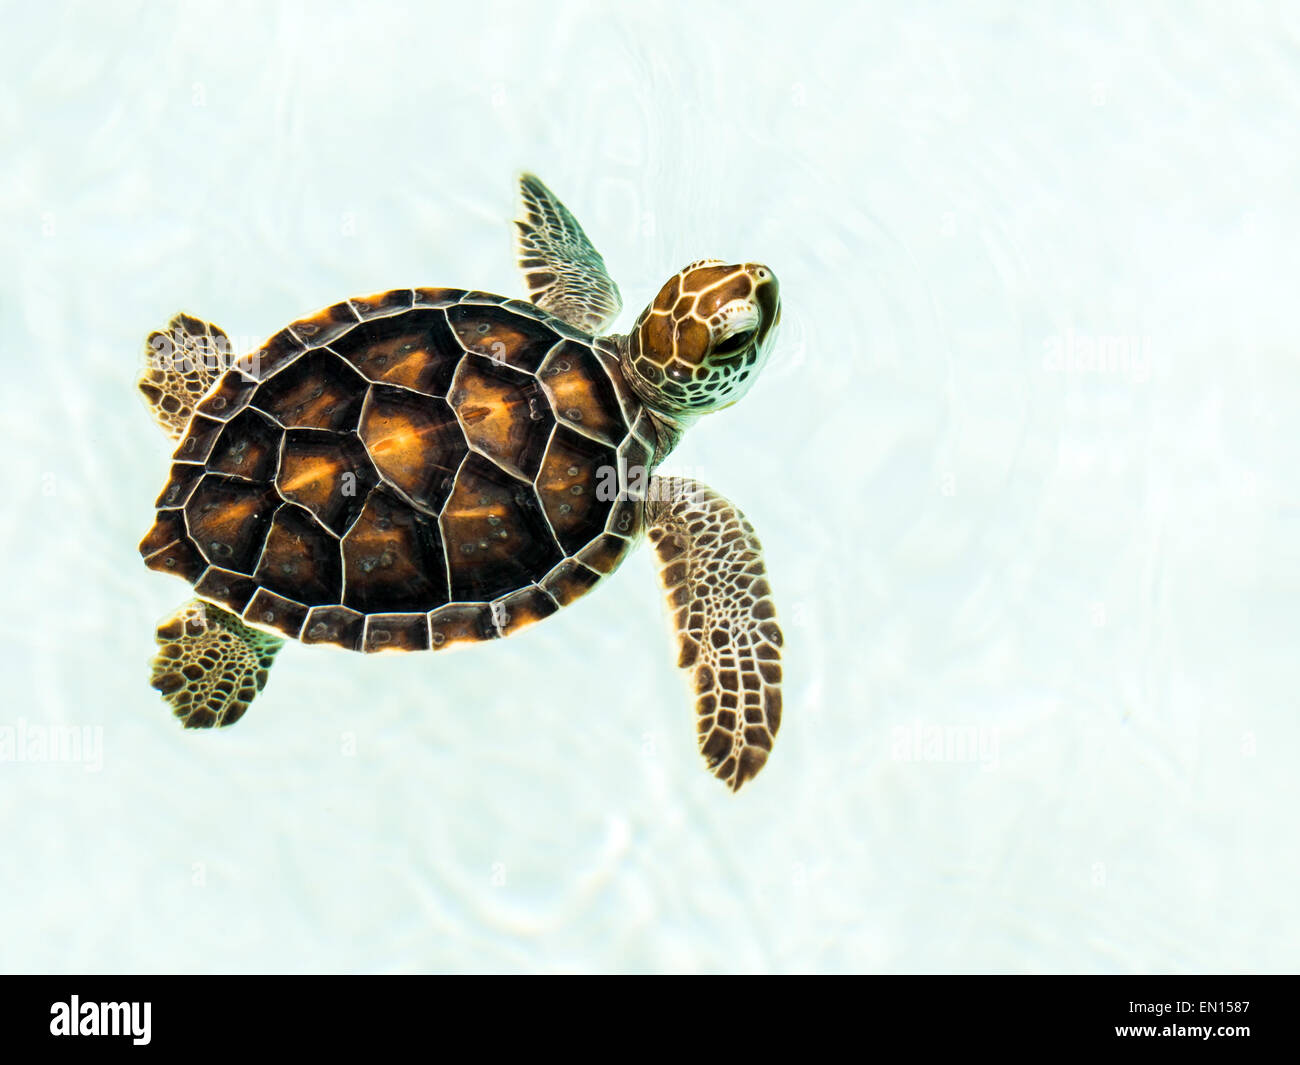 Cute endangered baby turtle swimming in crystal clear water Stock Photo